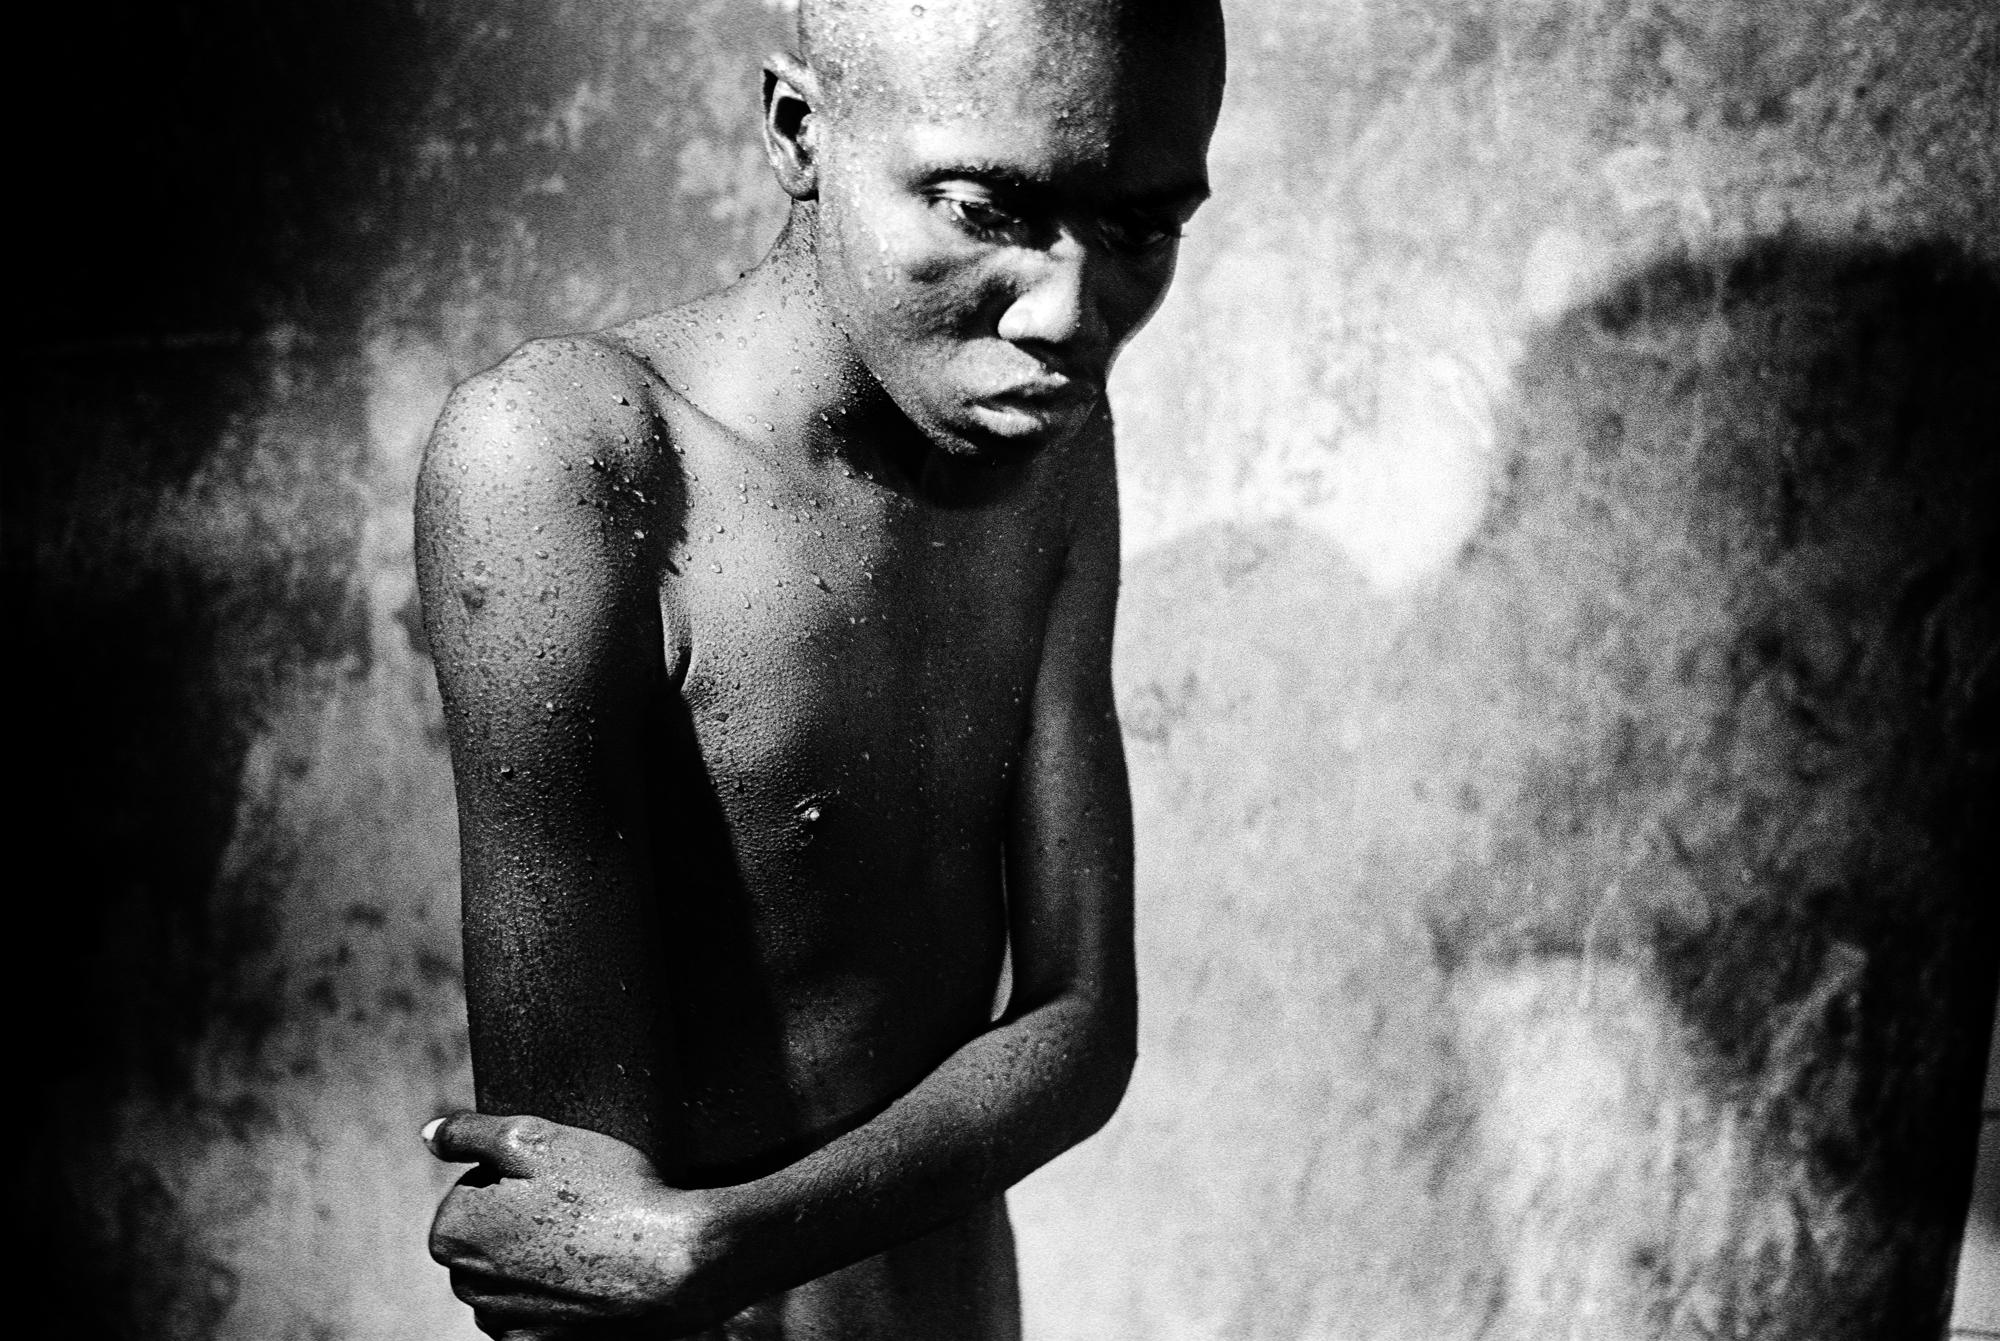 City of rest - SIERRA LEONE Freetown
A patient with psychological...